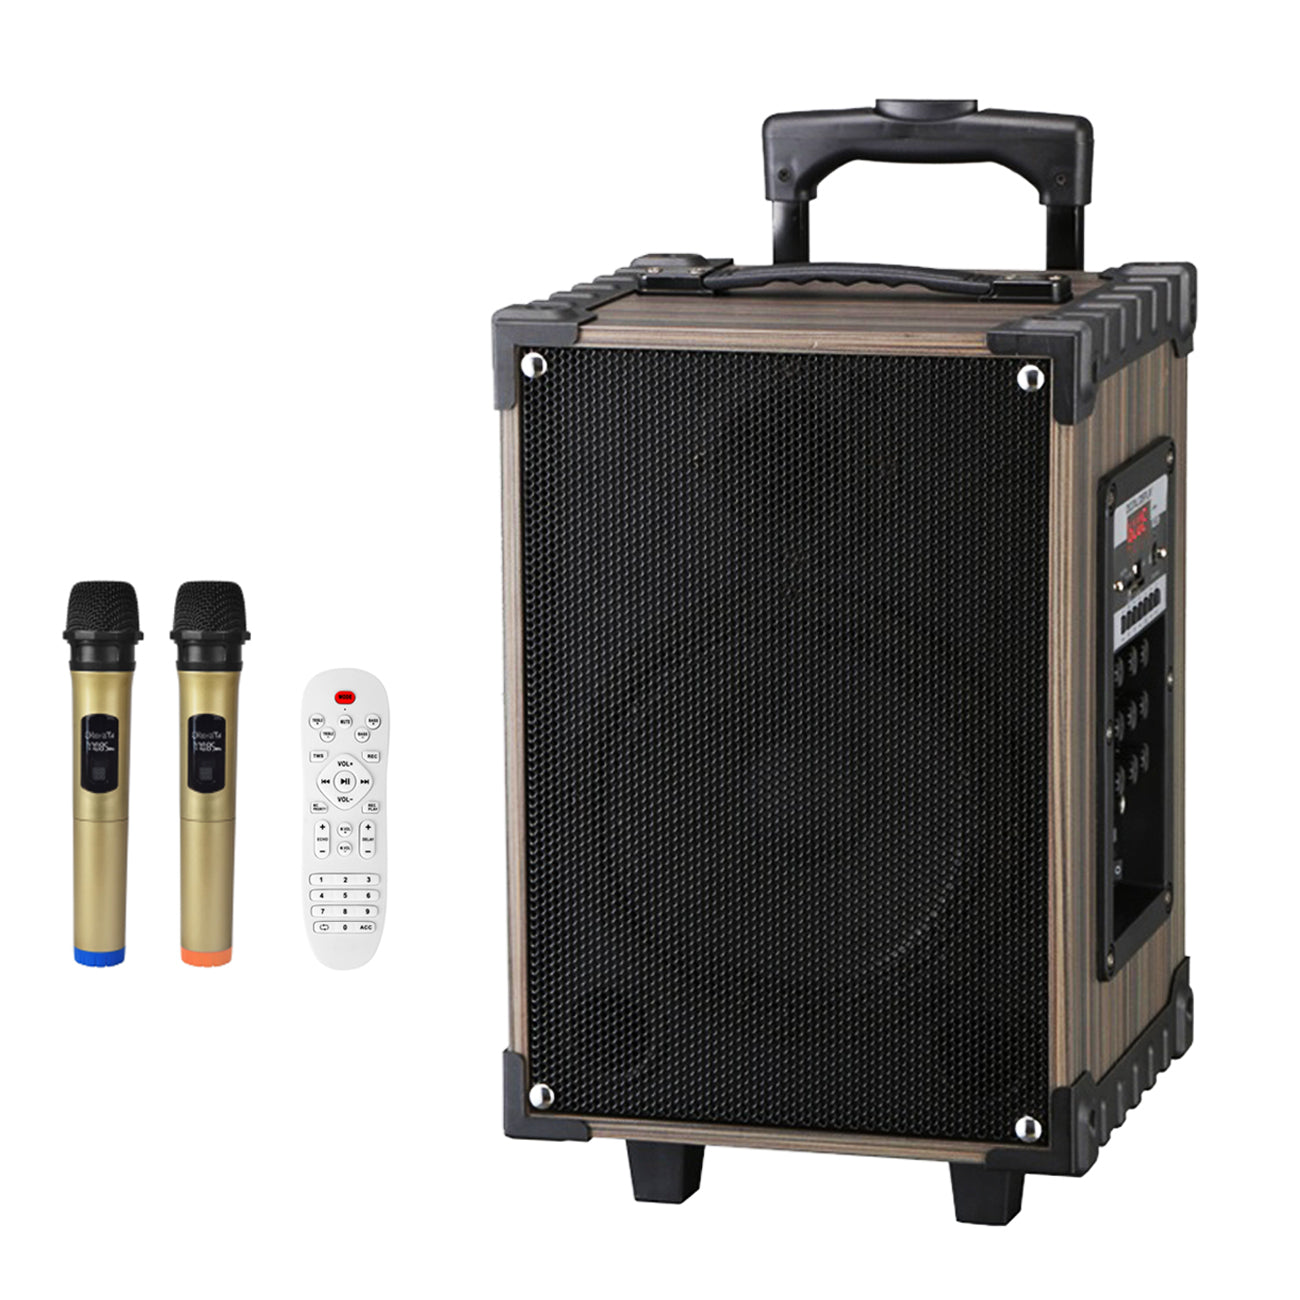 10" Speaker with Adapter charger and two wireless mic and remote